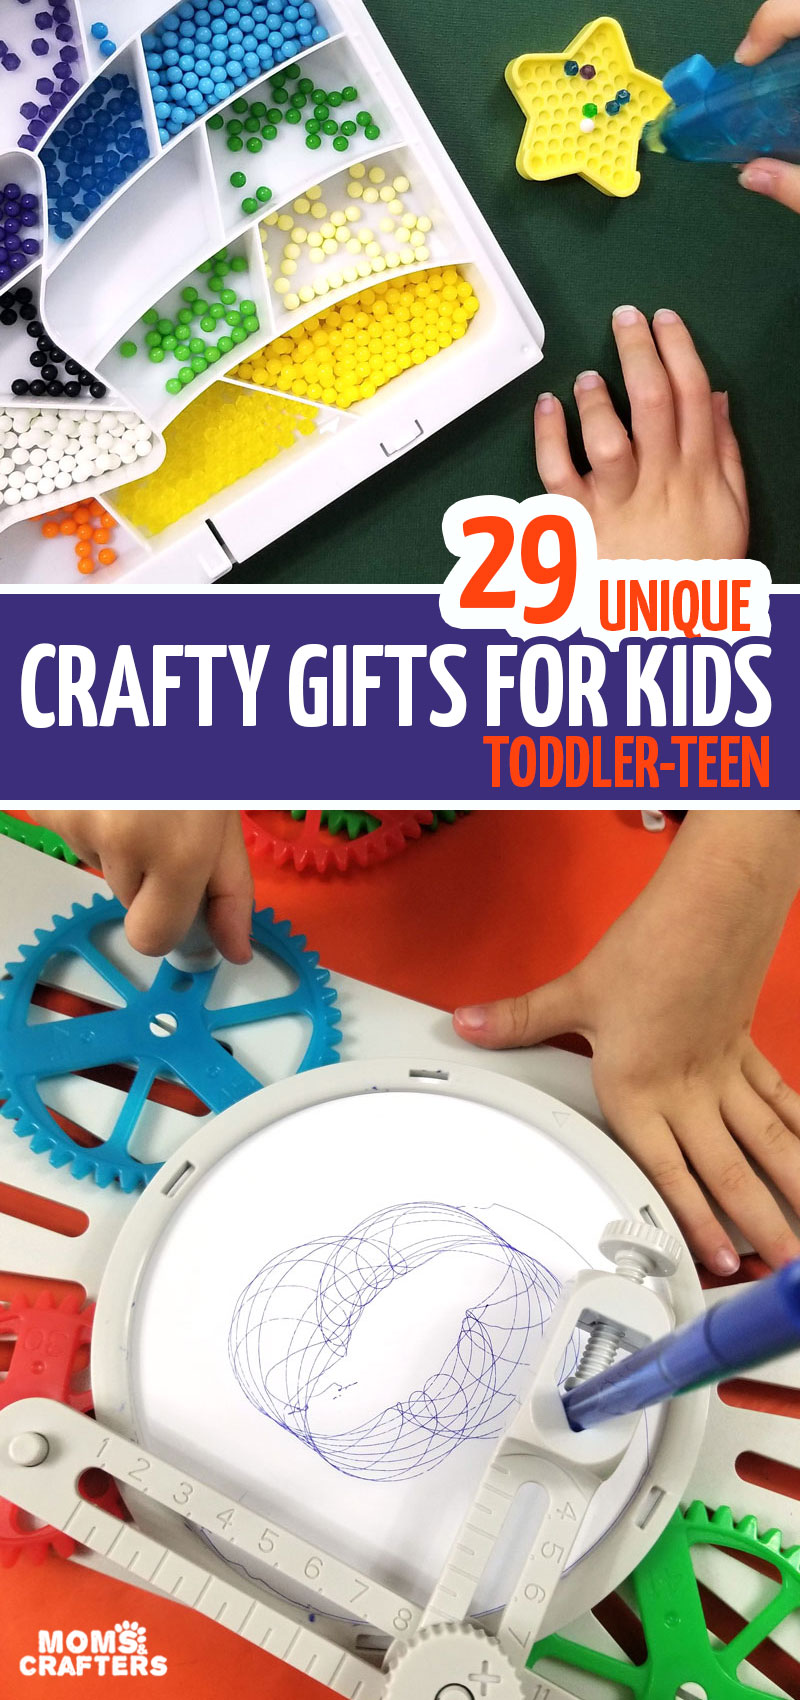 Your Essential Creativity Games Gift Guide - TinkerLab